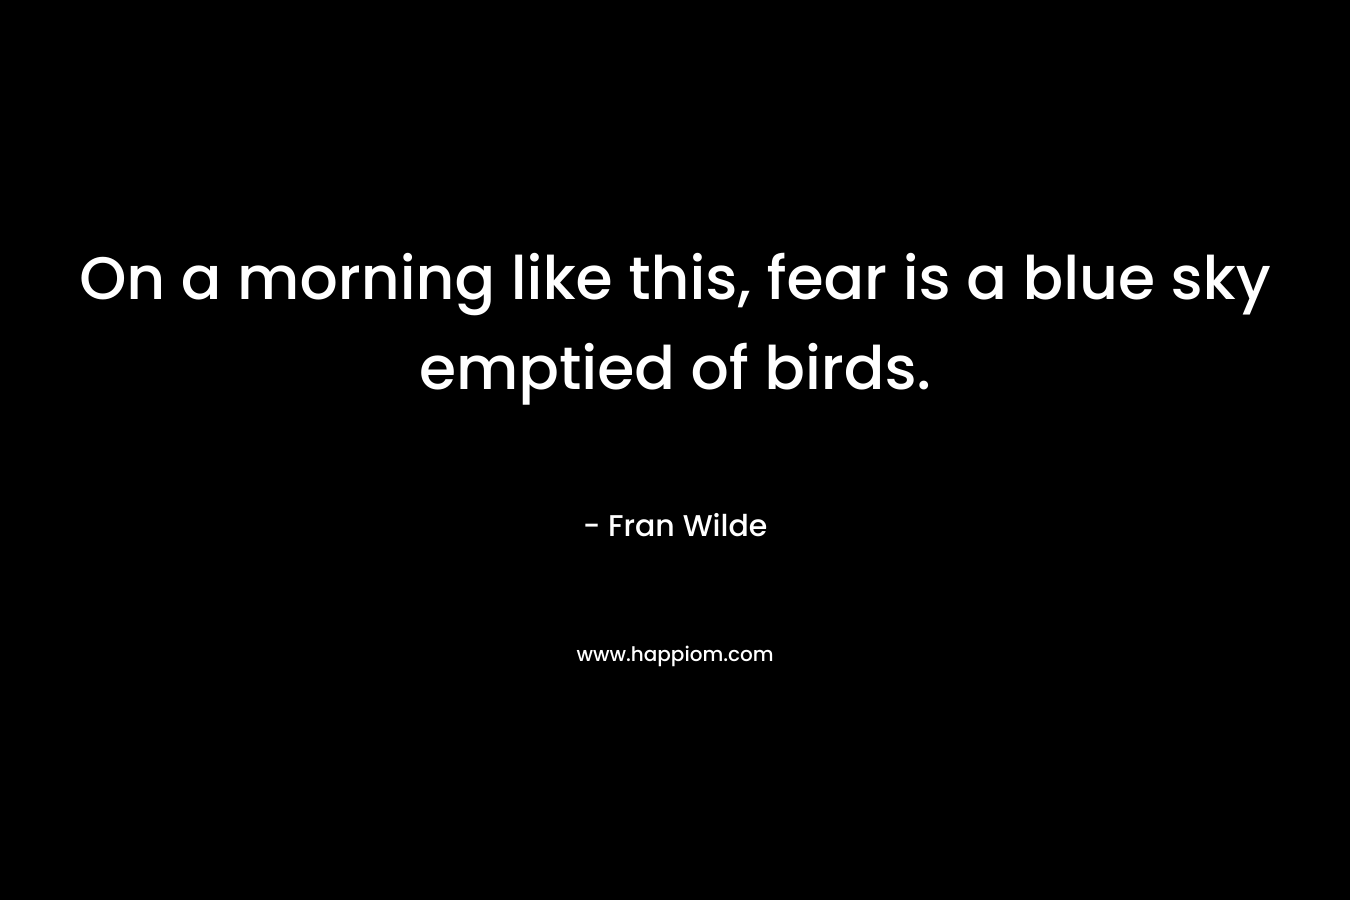 On a morning like this, fear is a blue sky emptied of birds. – Fran Wilde